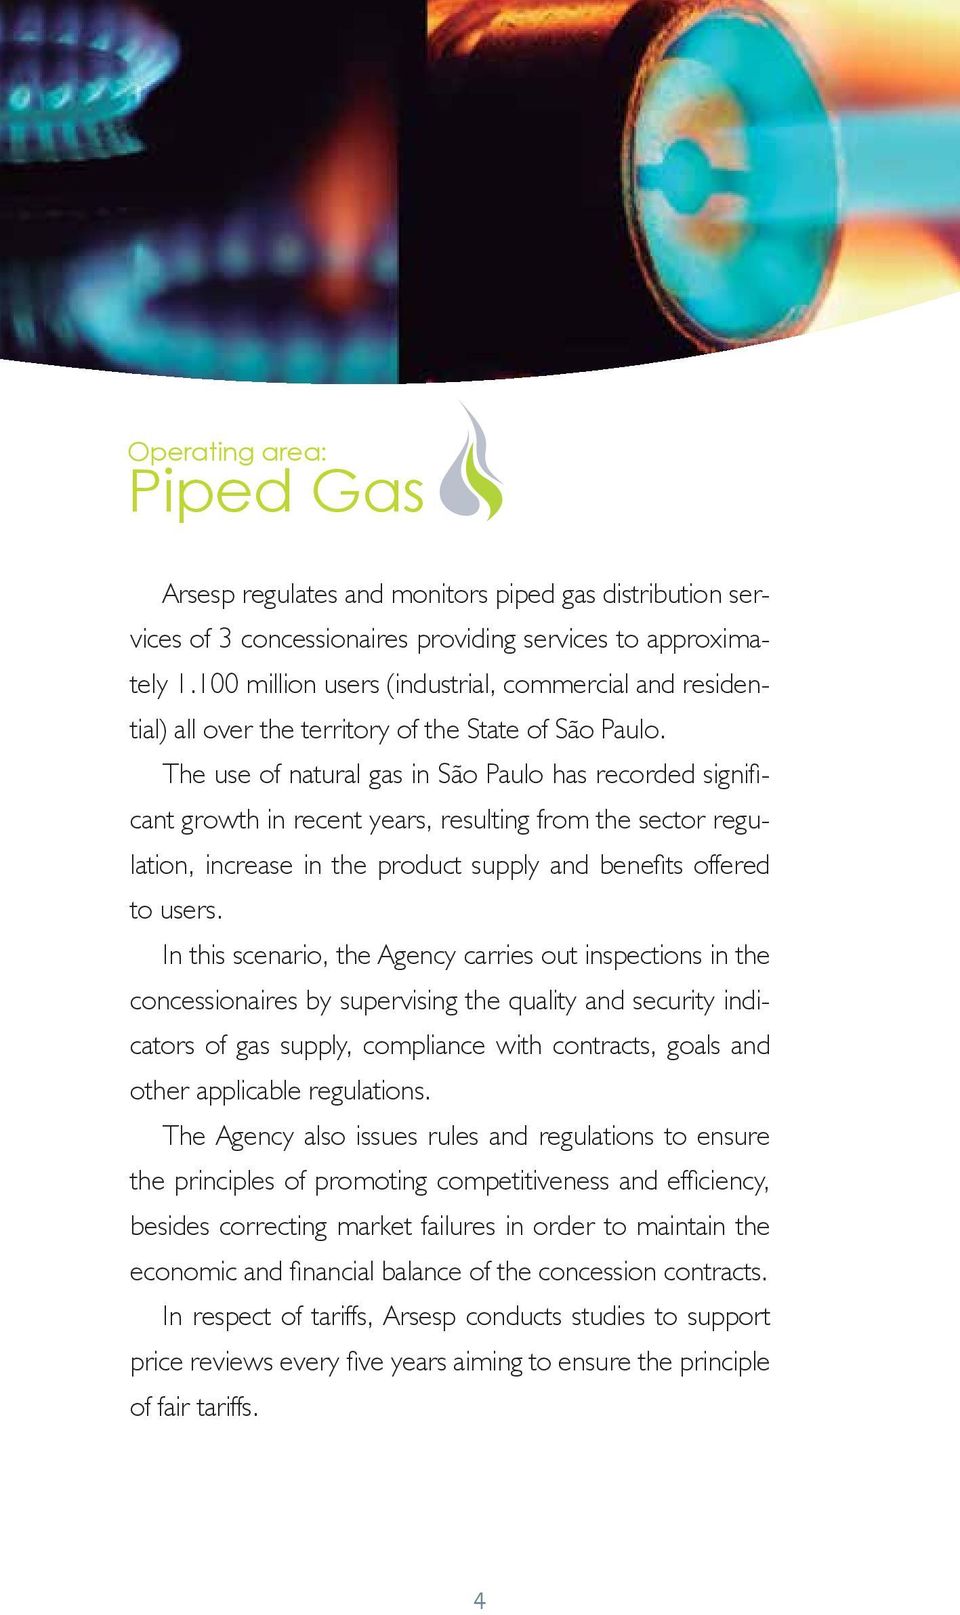 The use of natural gas in São Paulo has recorded significant growth in recent years, resulting from the sector regulation, increase in the product supply and benefits offered to users.